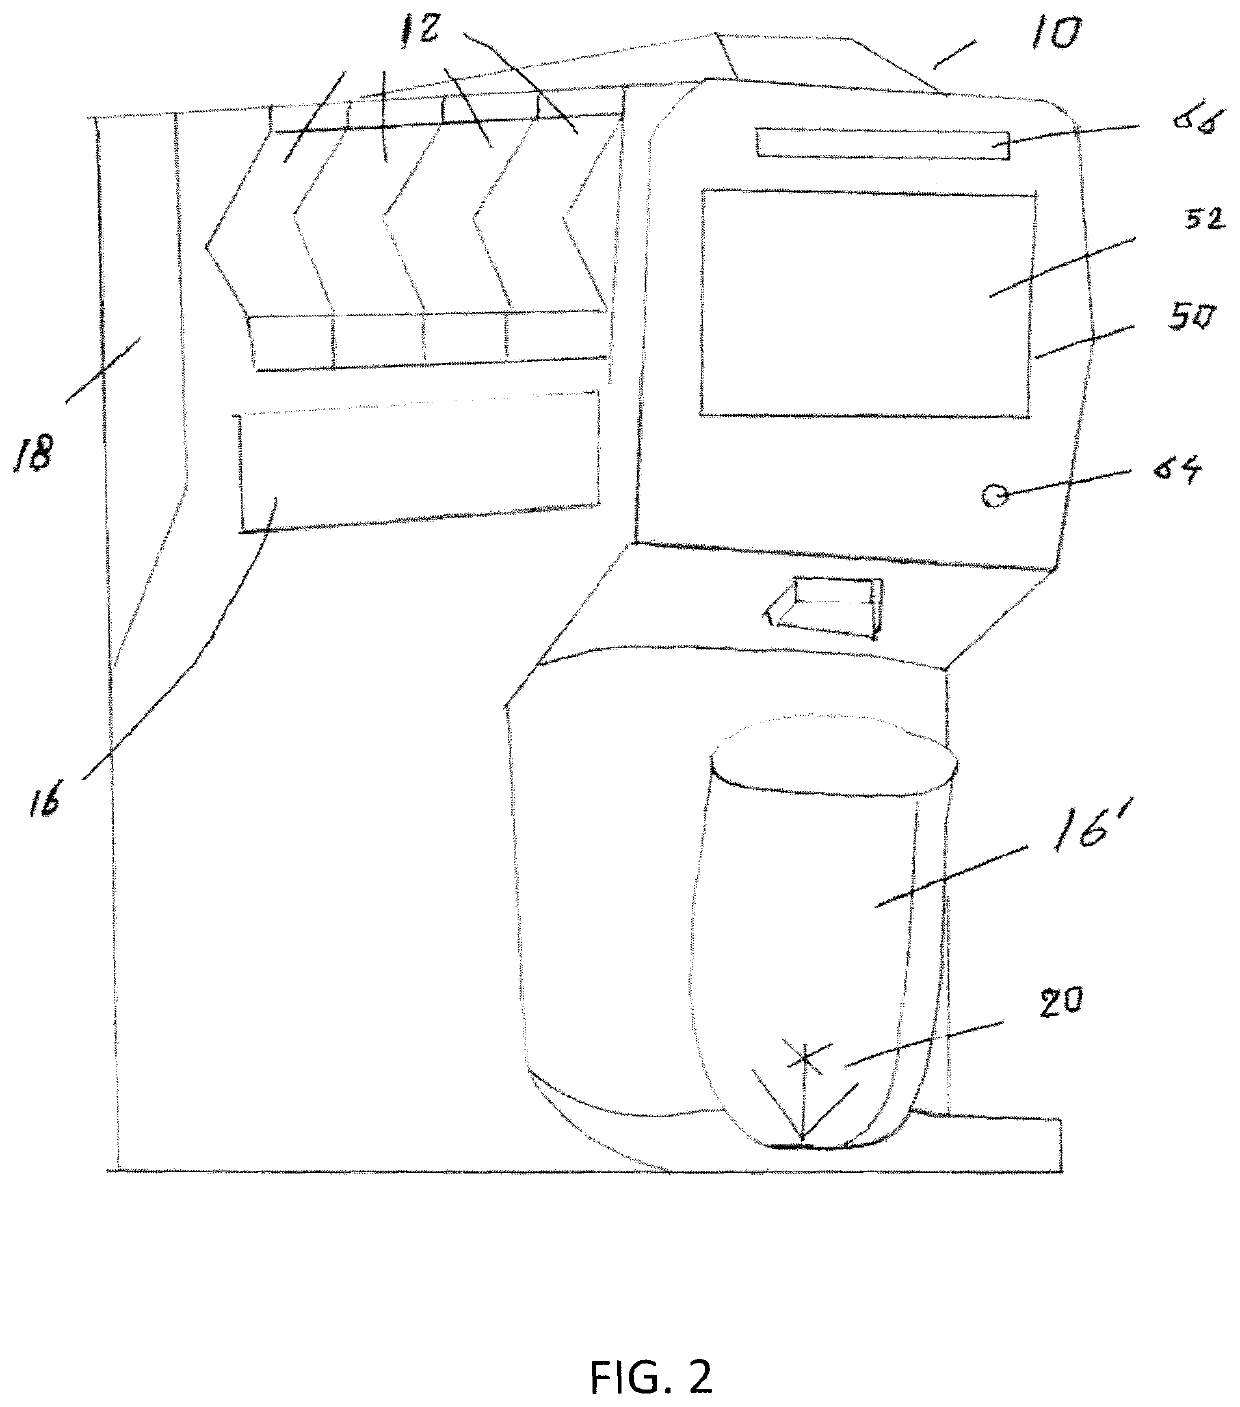 Dispensing system for delivering customized quantities of dietary and nutraceutical supplements